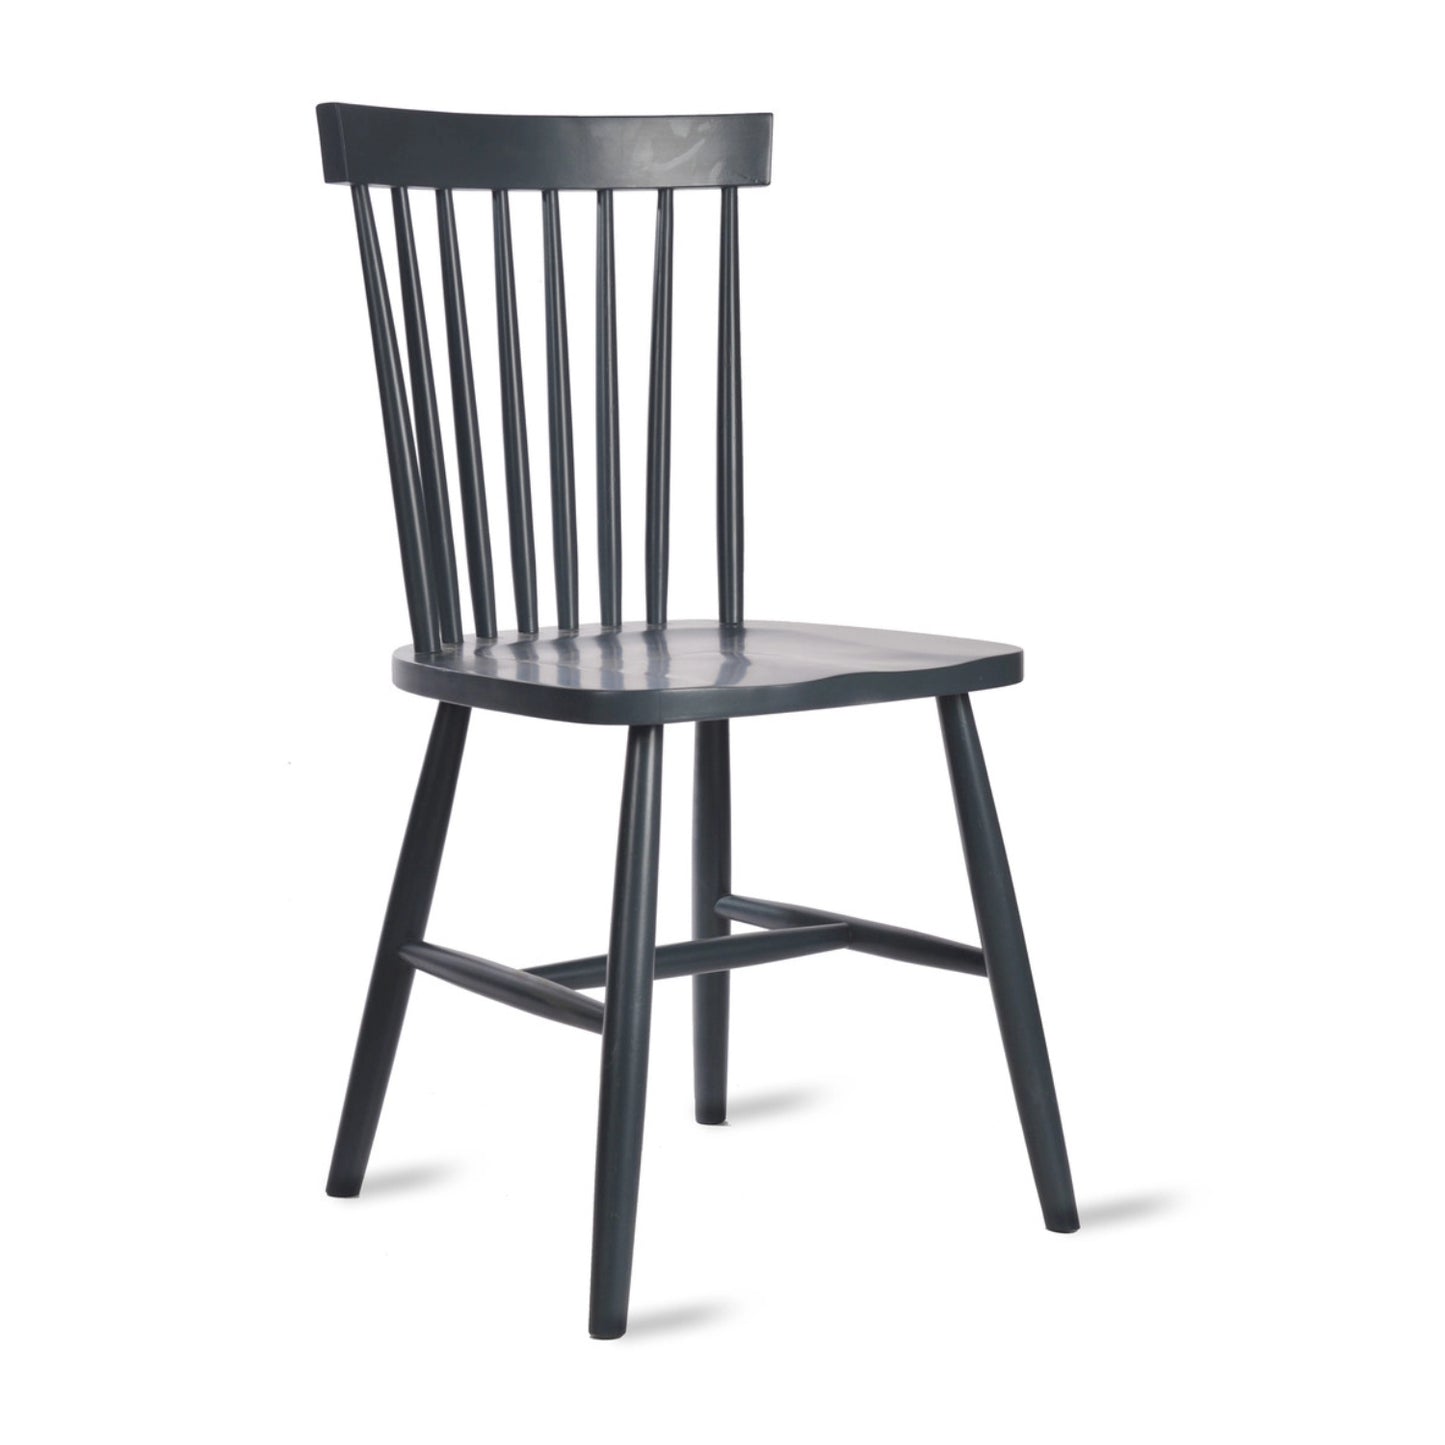 Pair of Spindle Back Chairs in Carbon by Garden Trading